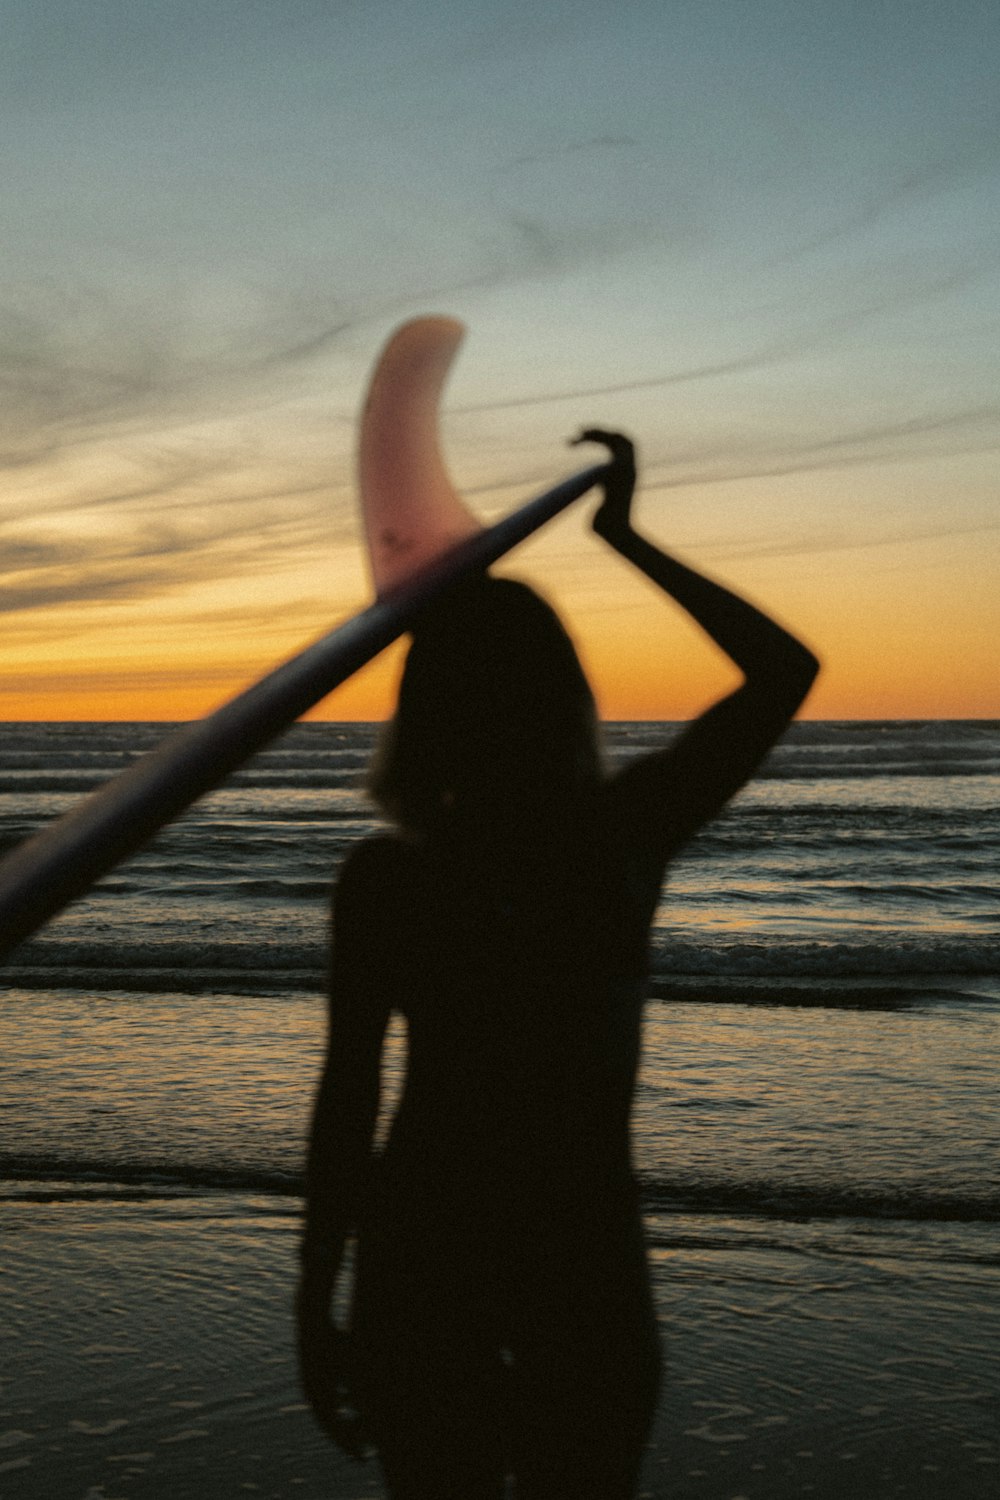 a woman holding a surfboard on top of a beach